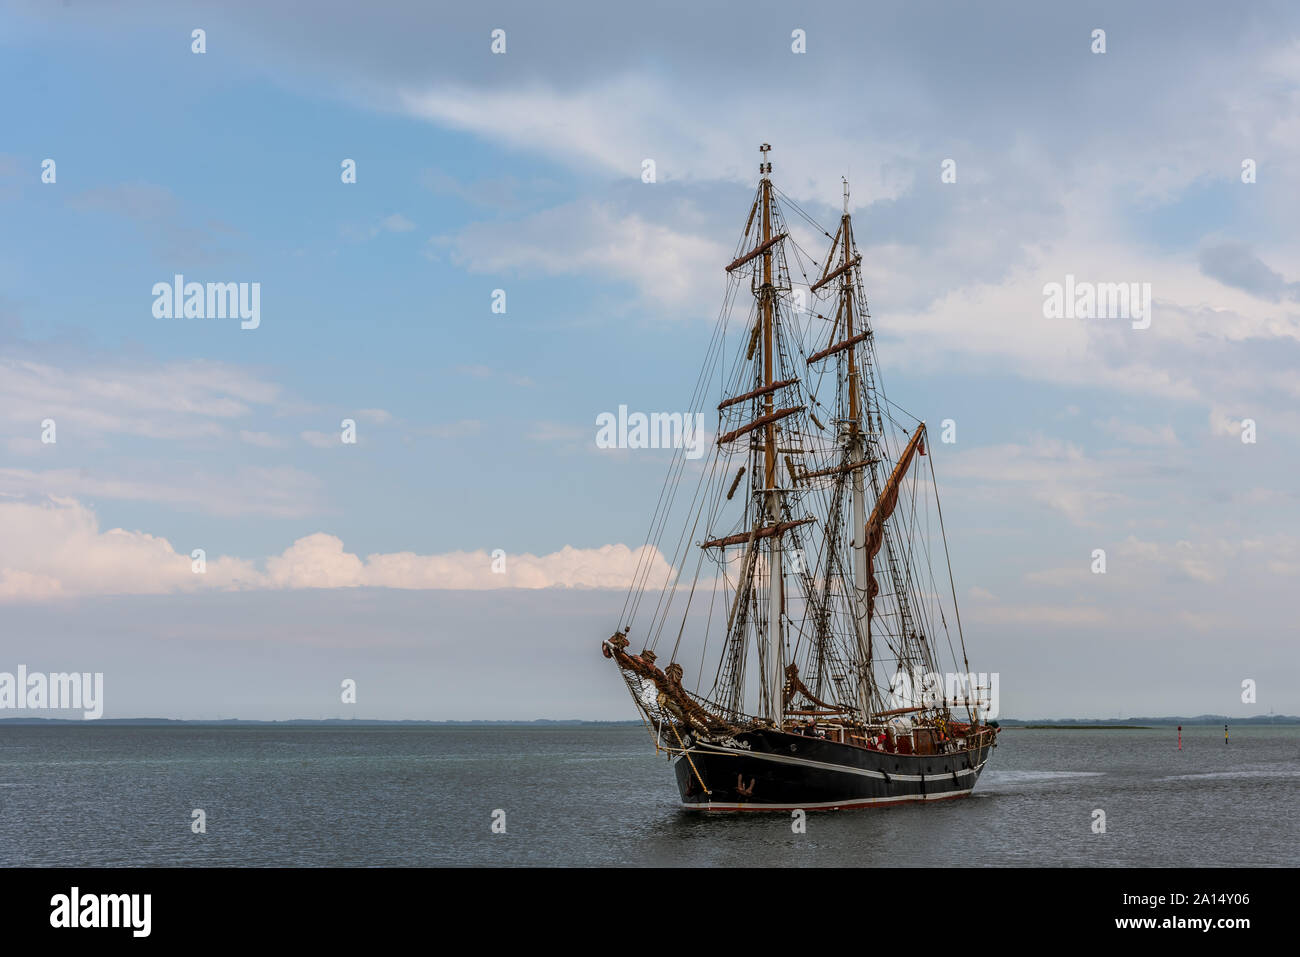 the english training ship eye of the wind in the sea, July 13, 2019 Stock Photo